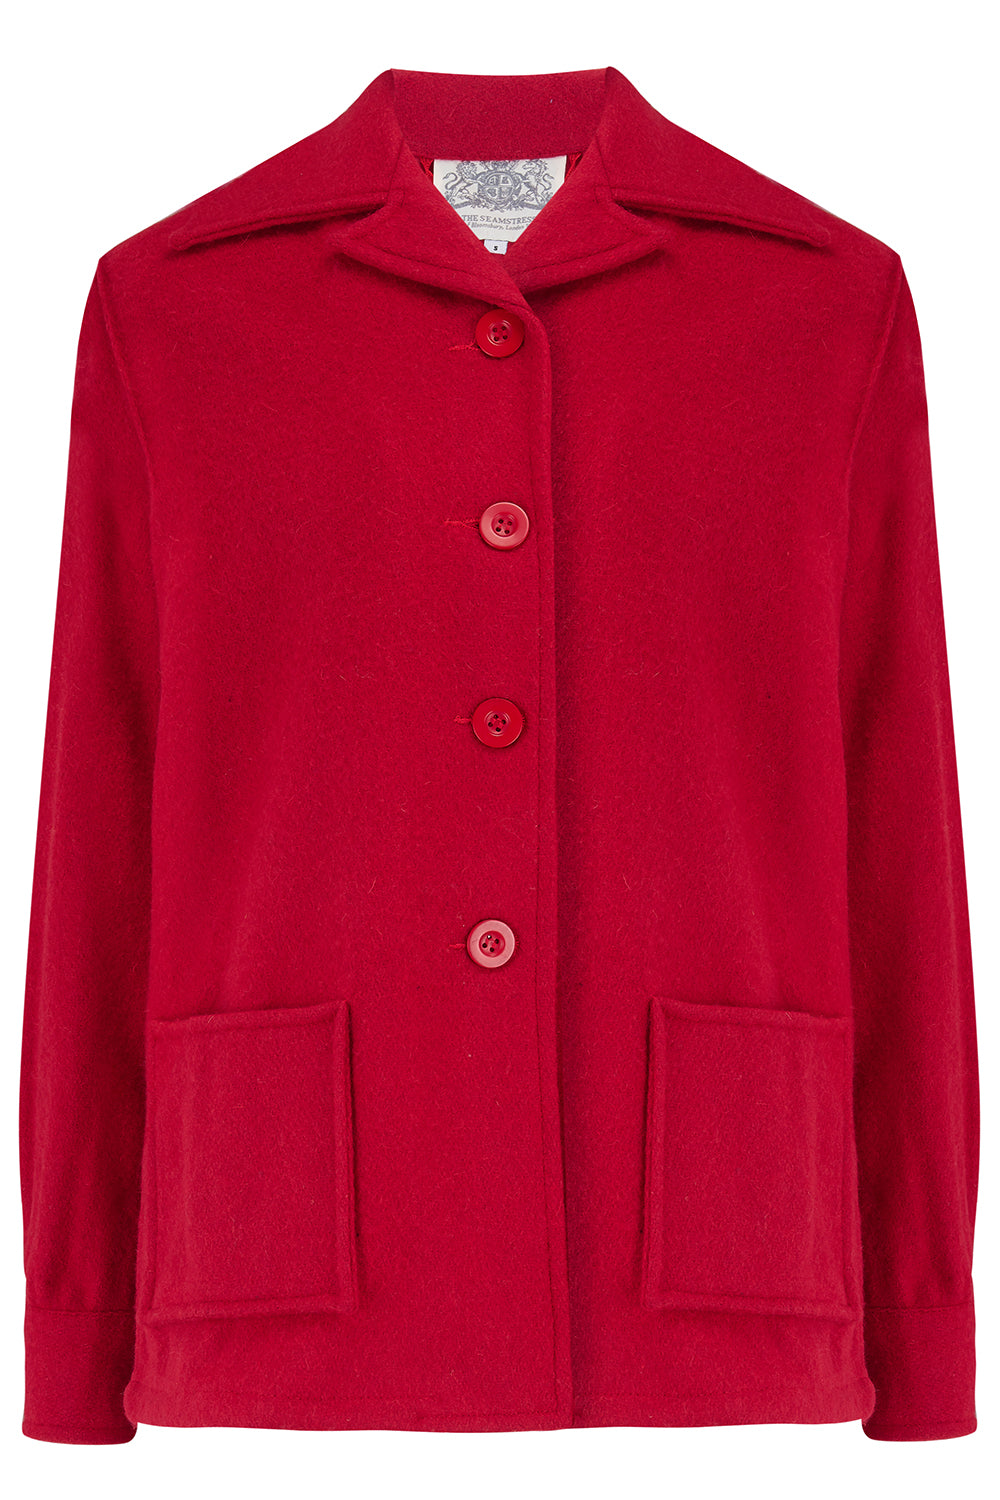 "Pearl" Pendleton 49er Style Wool Jacket in 40s Red by The Seamstress Of Bloomsbury, Classic & Authentic 1940s Vintage Style - True and authentic vintage style clothing, inspired by the Classic styles of CC41 , WW2 and the fun 1950s RocknRoll era, for everyday wear plus events like Goodwood Revival, Twinwood Festival and Viva Las Vegas Rockabilly Weekend Rock n Romance The Seamstress Of Bloomsbury